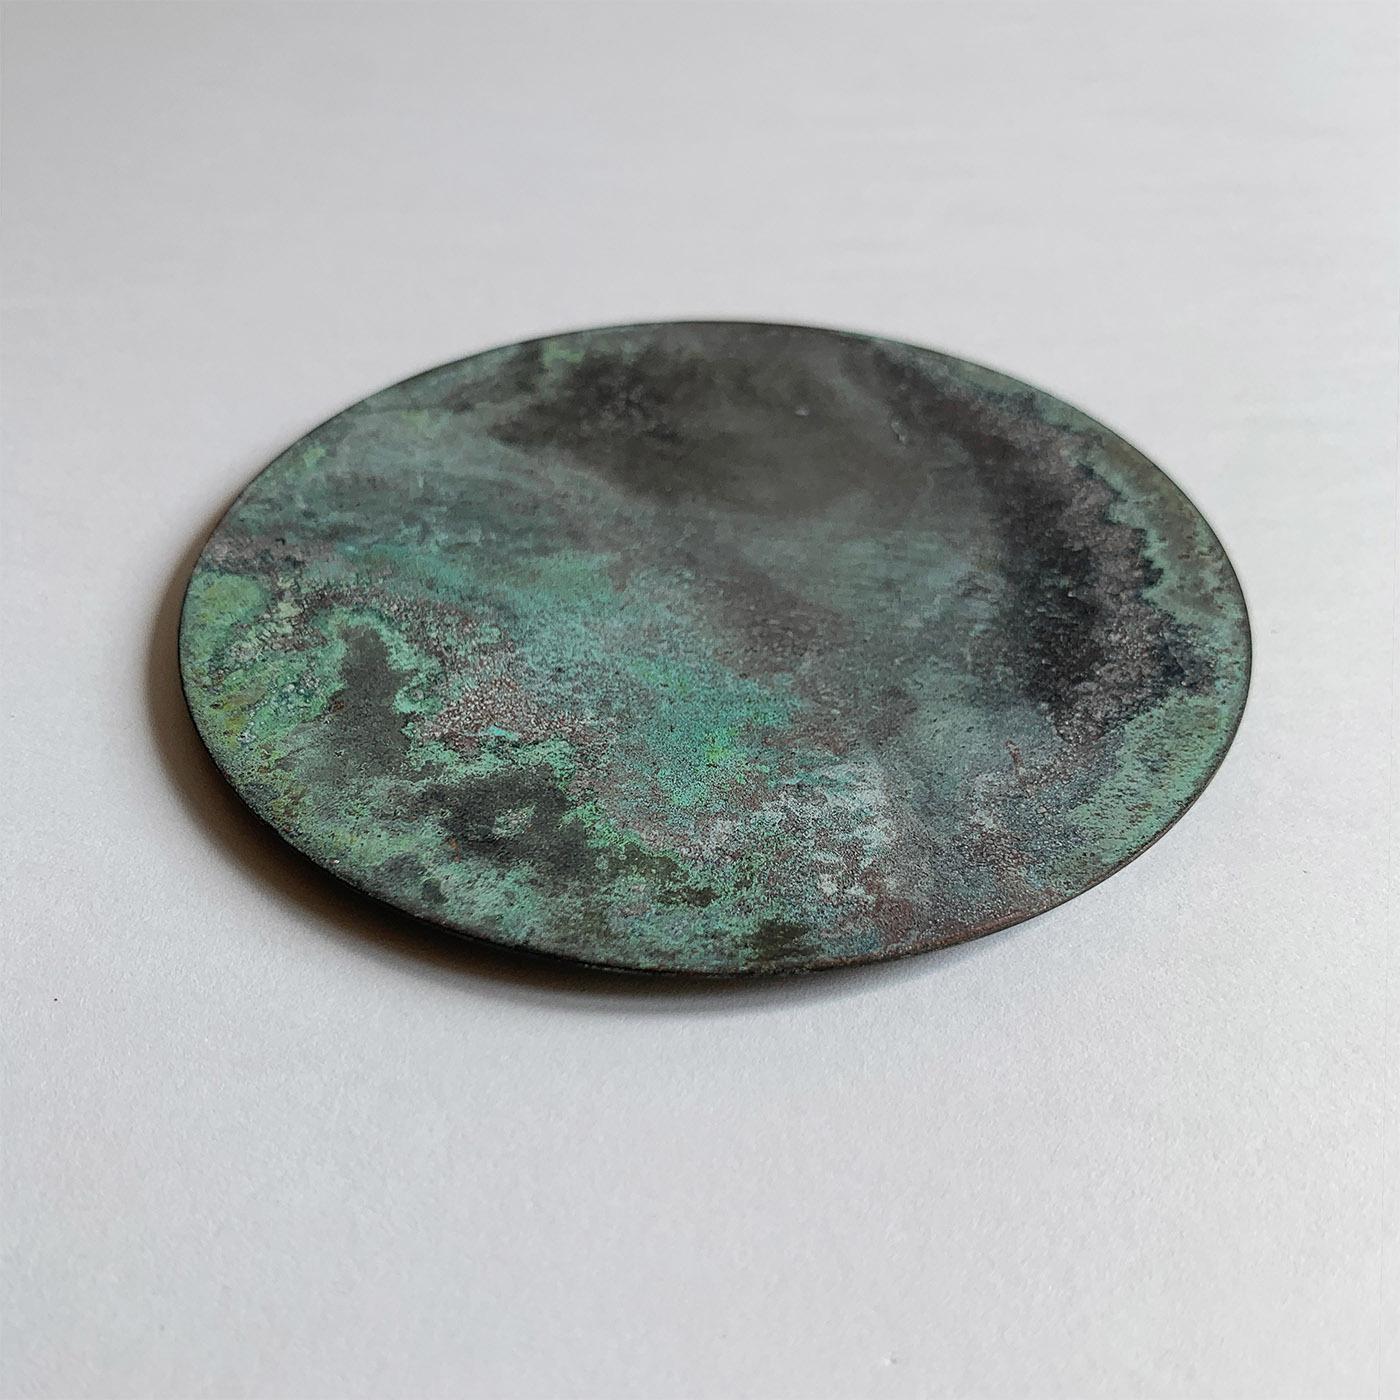 Treated with acids and oxides to achieve their distinctive corroded texture and unpredictable blue hues and traceries, the six brass coasters composing this set are craftsmanship gems of timeless allure. Their back is covered with a velvety material